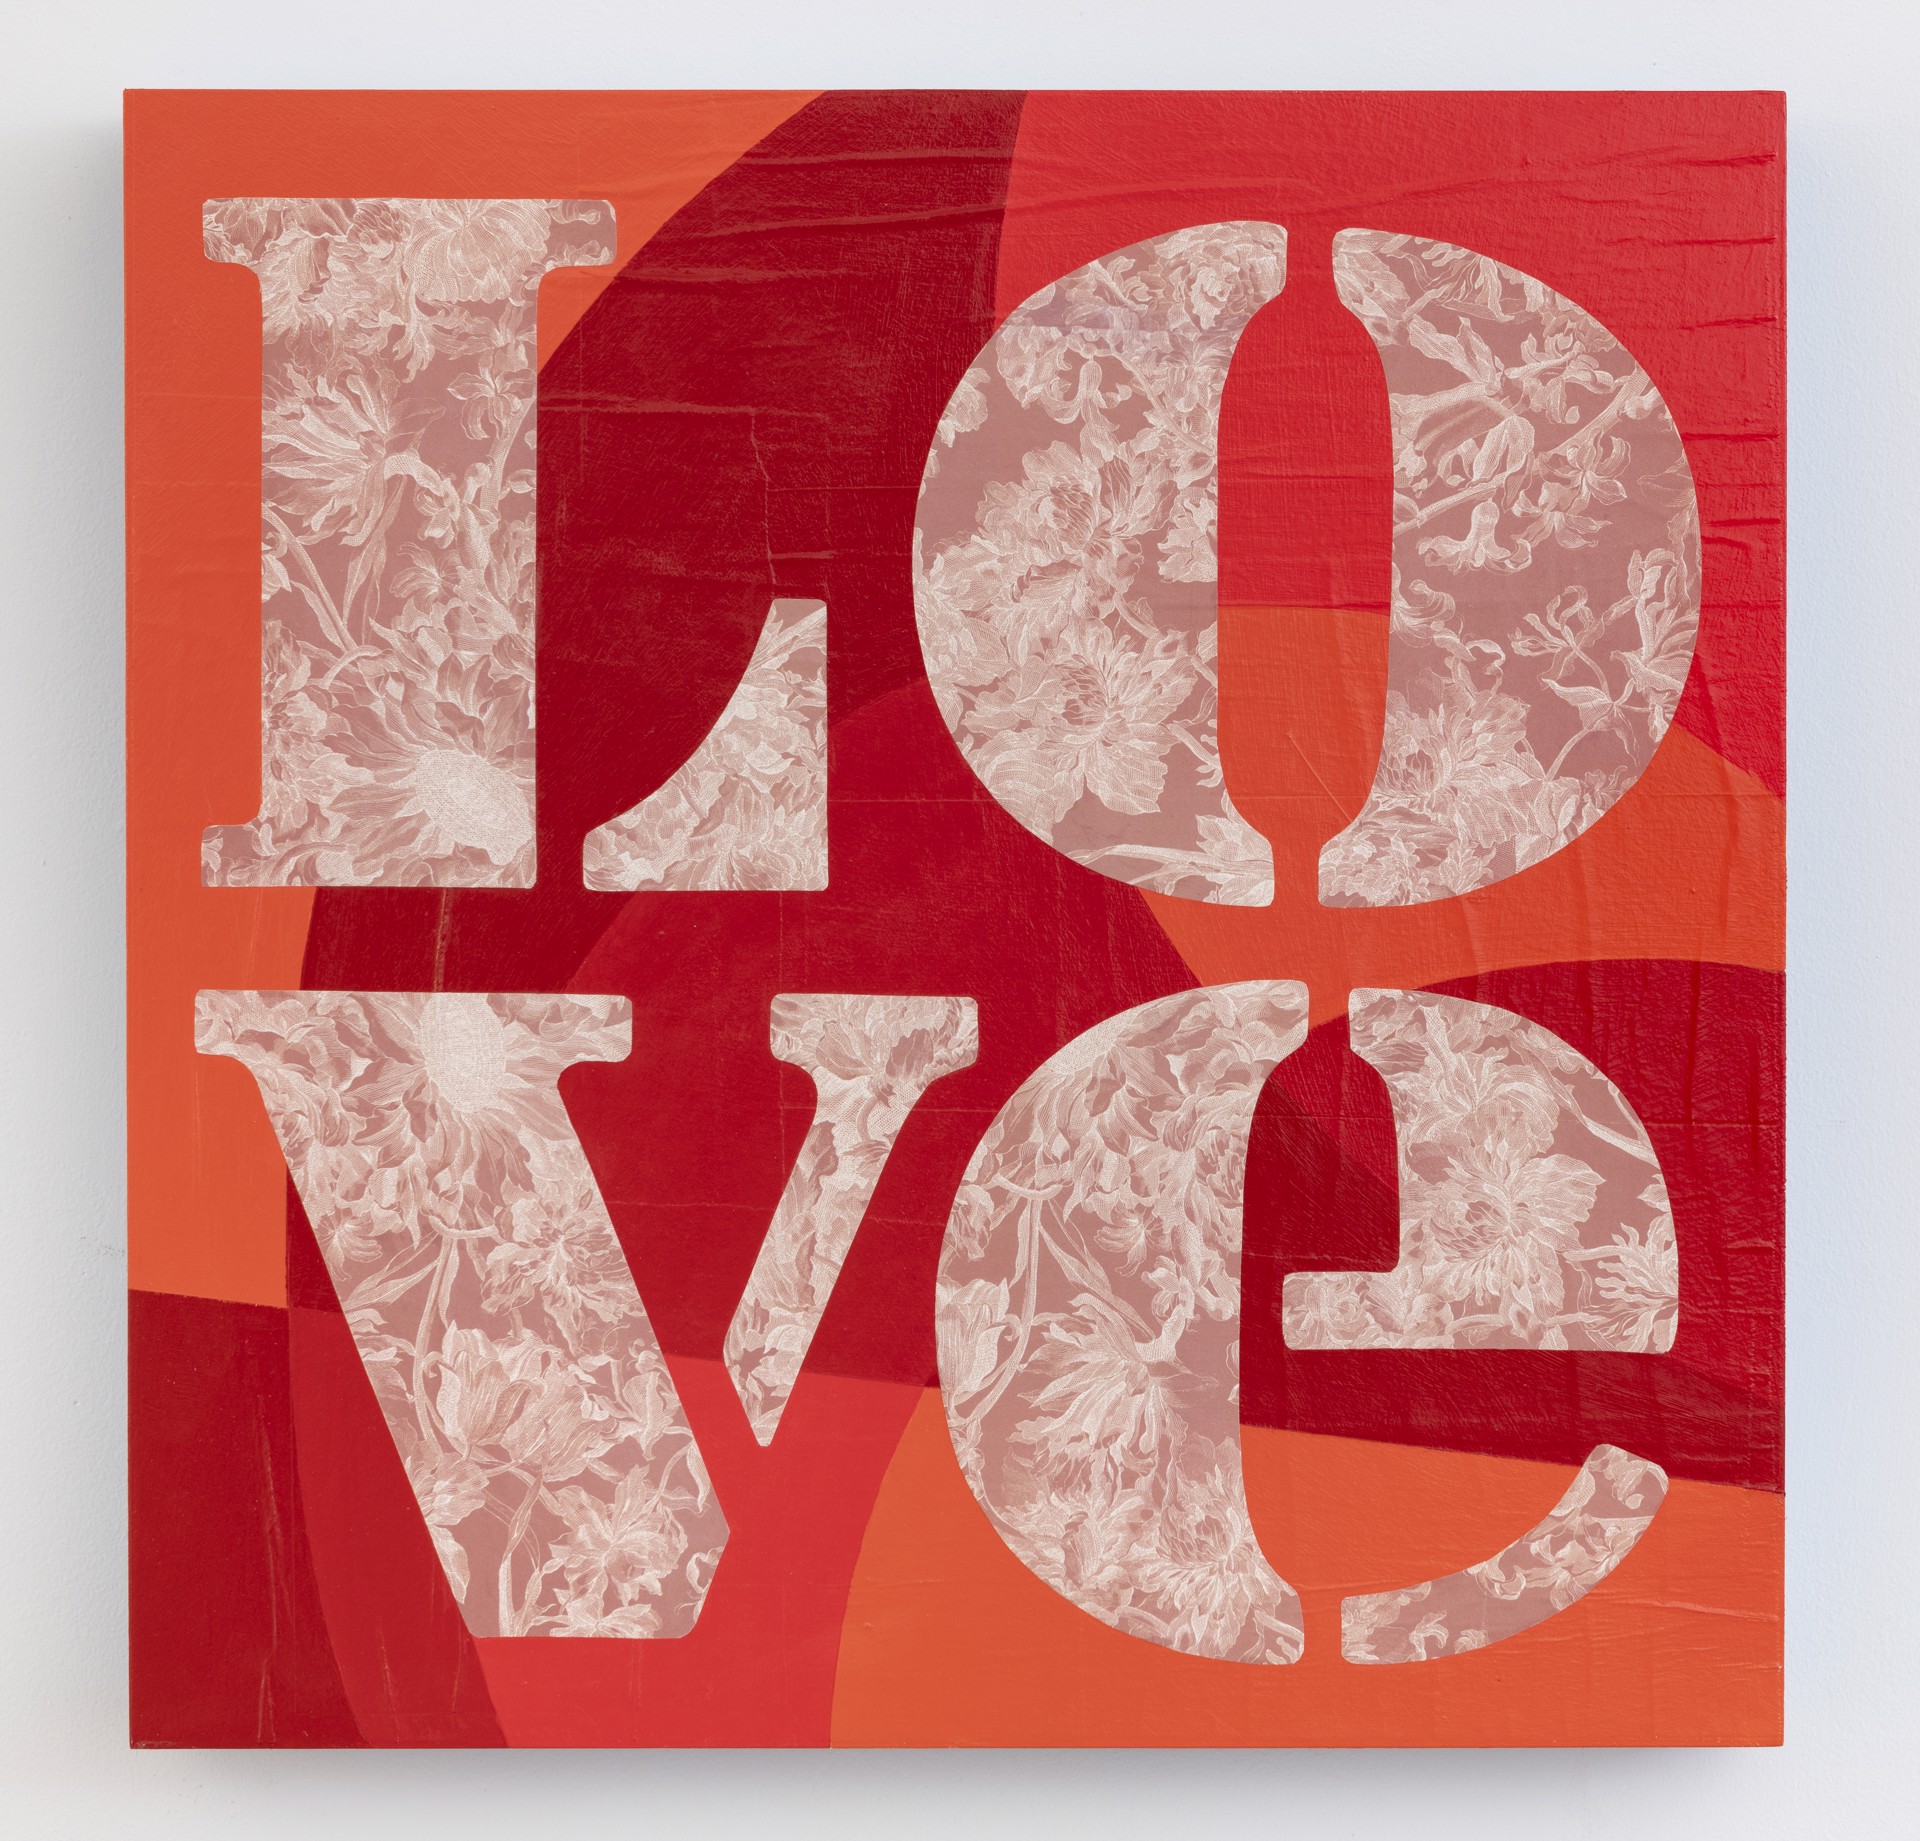 LOVE (Red) by Cey Adams